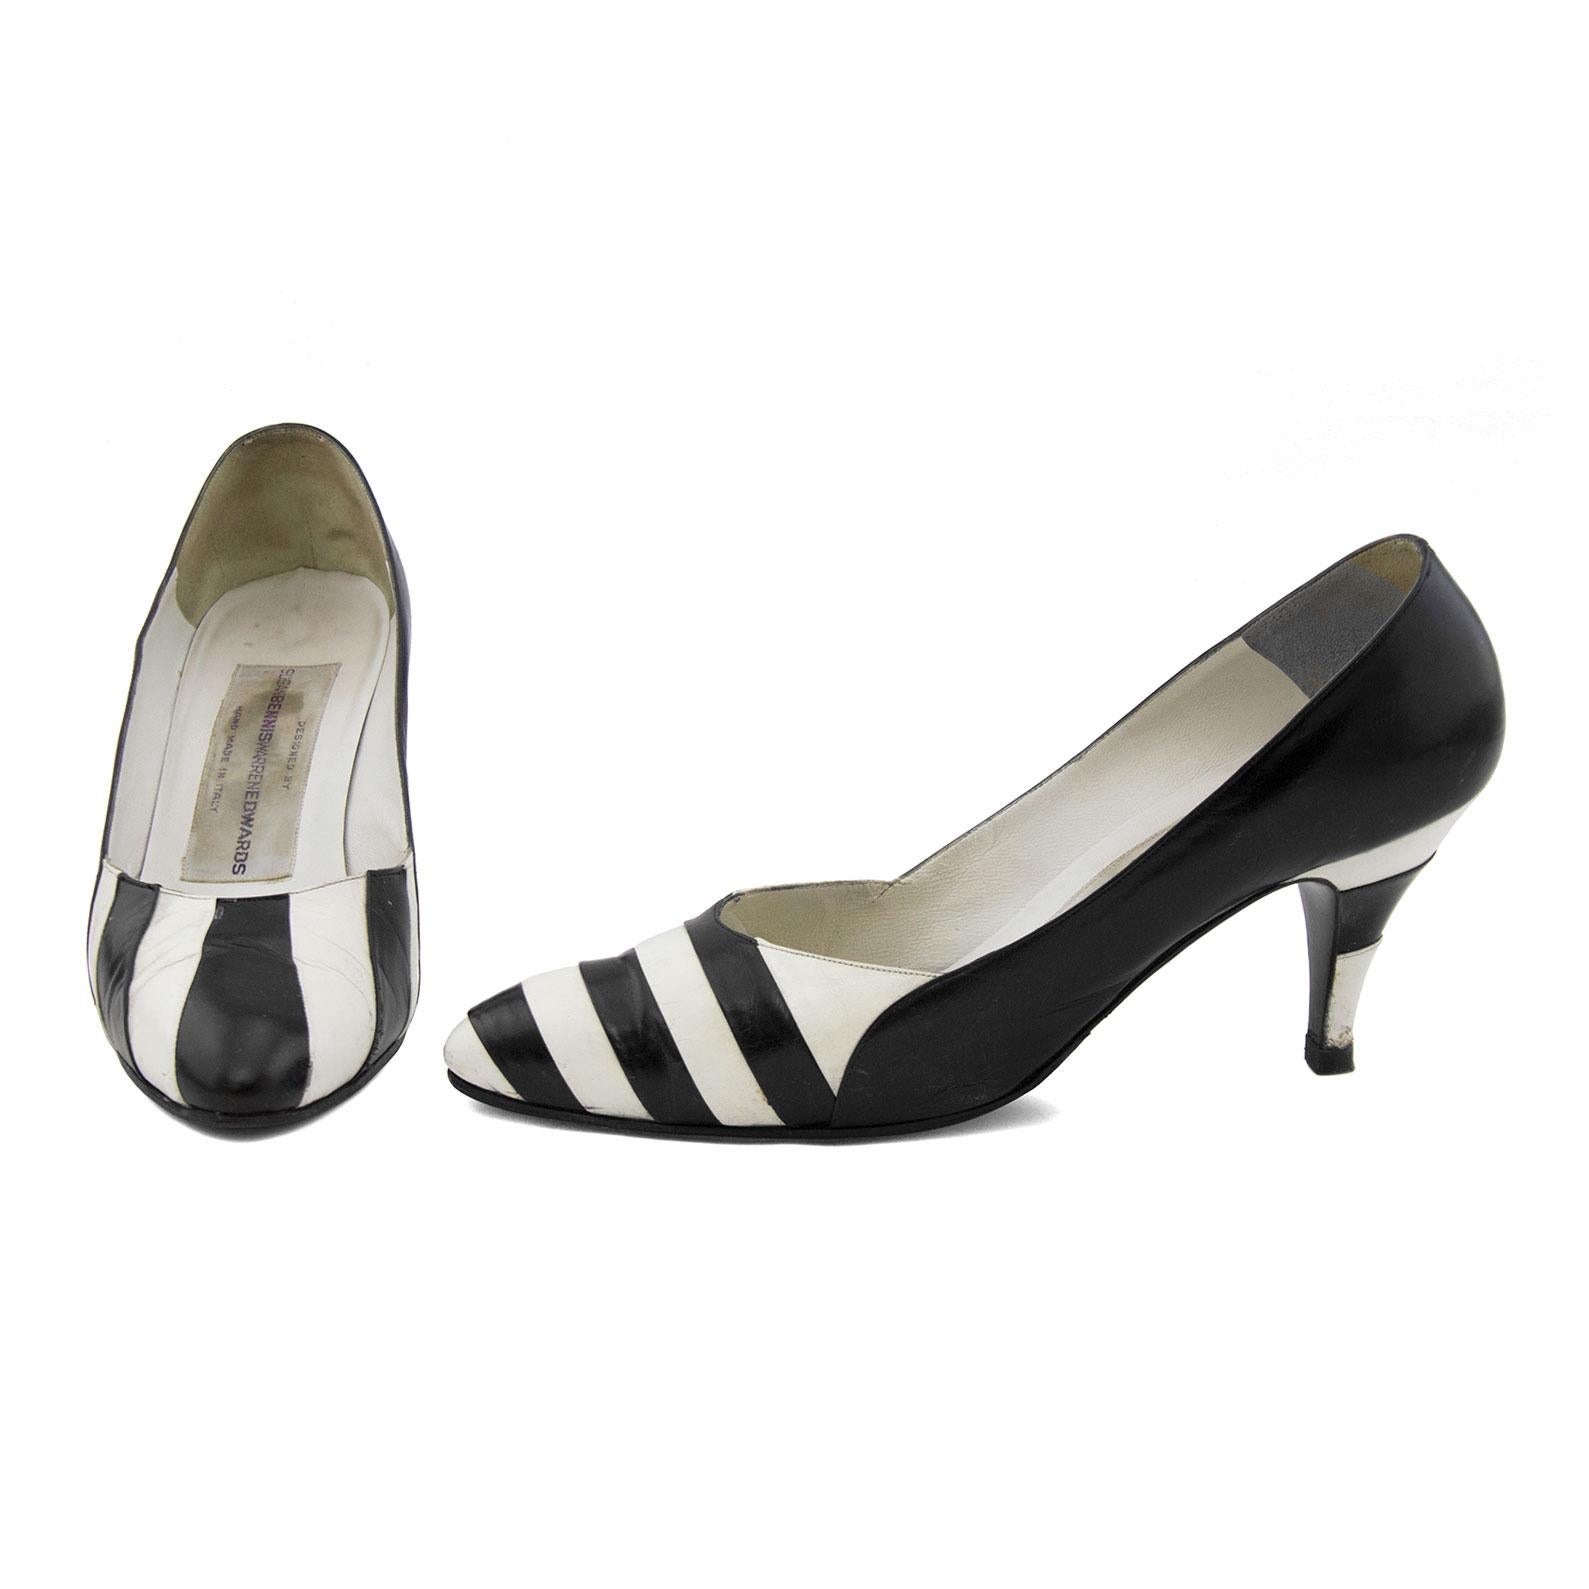 black and white striped pumps